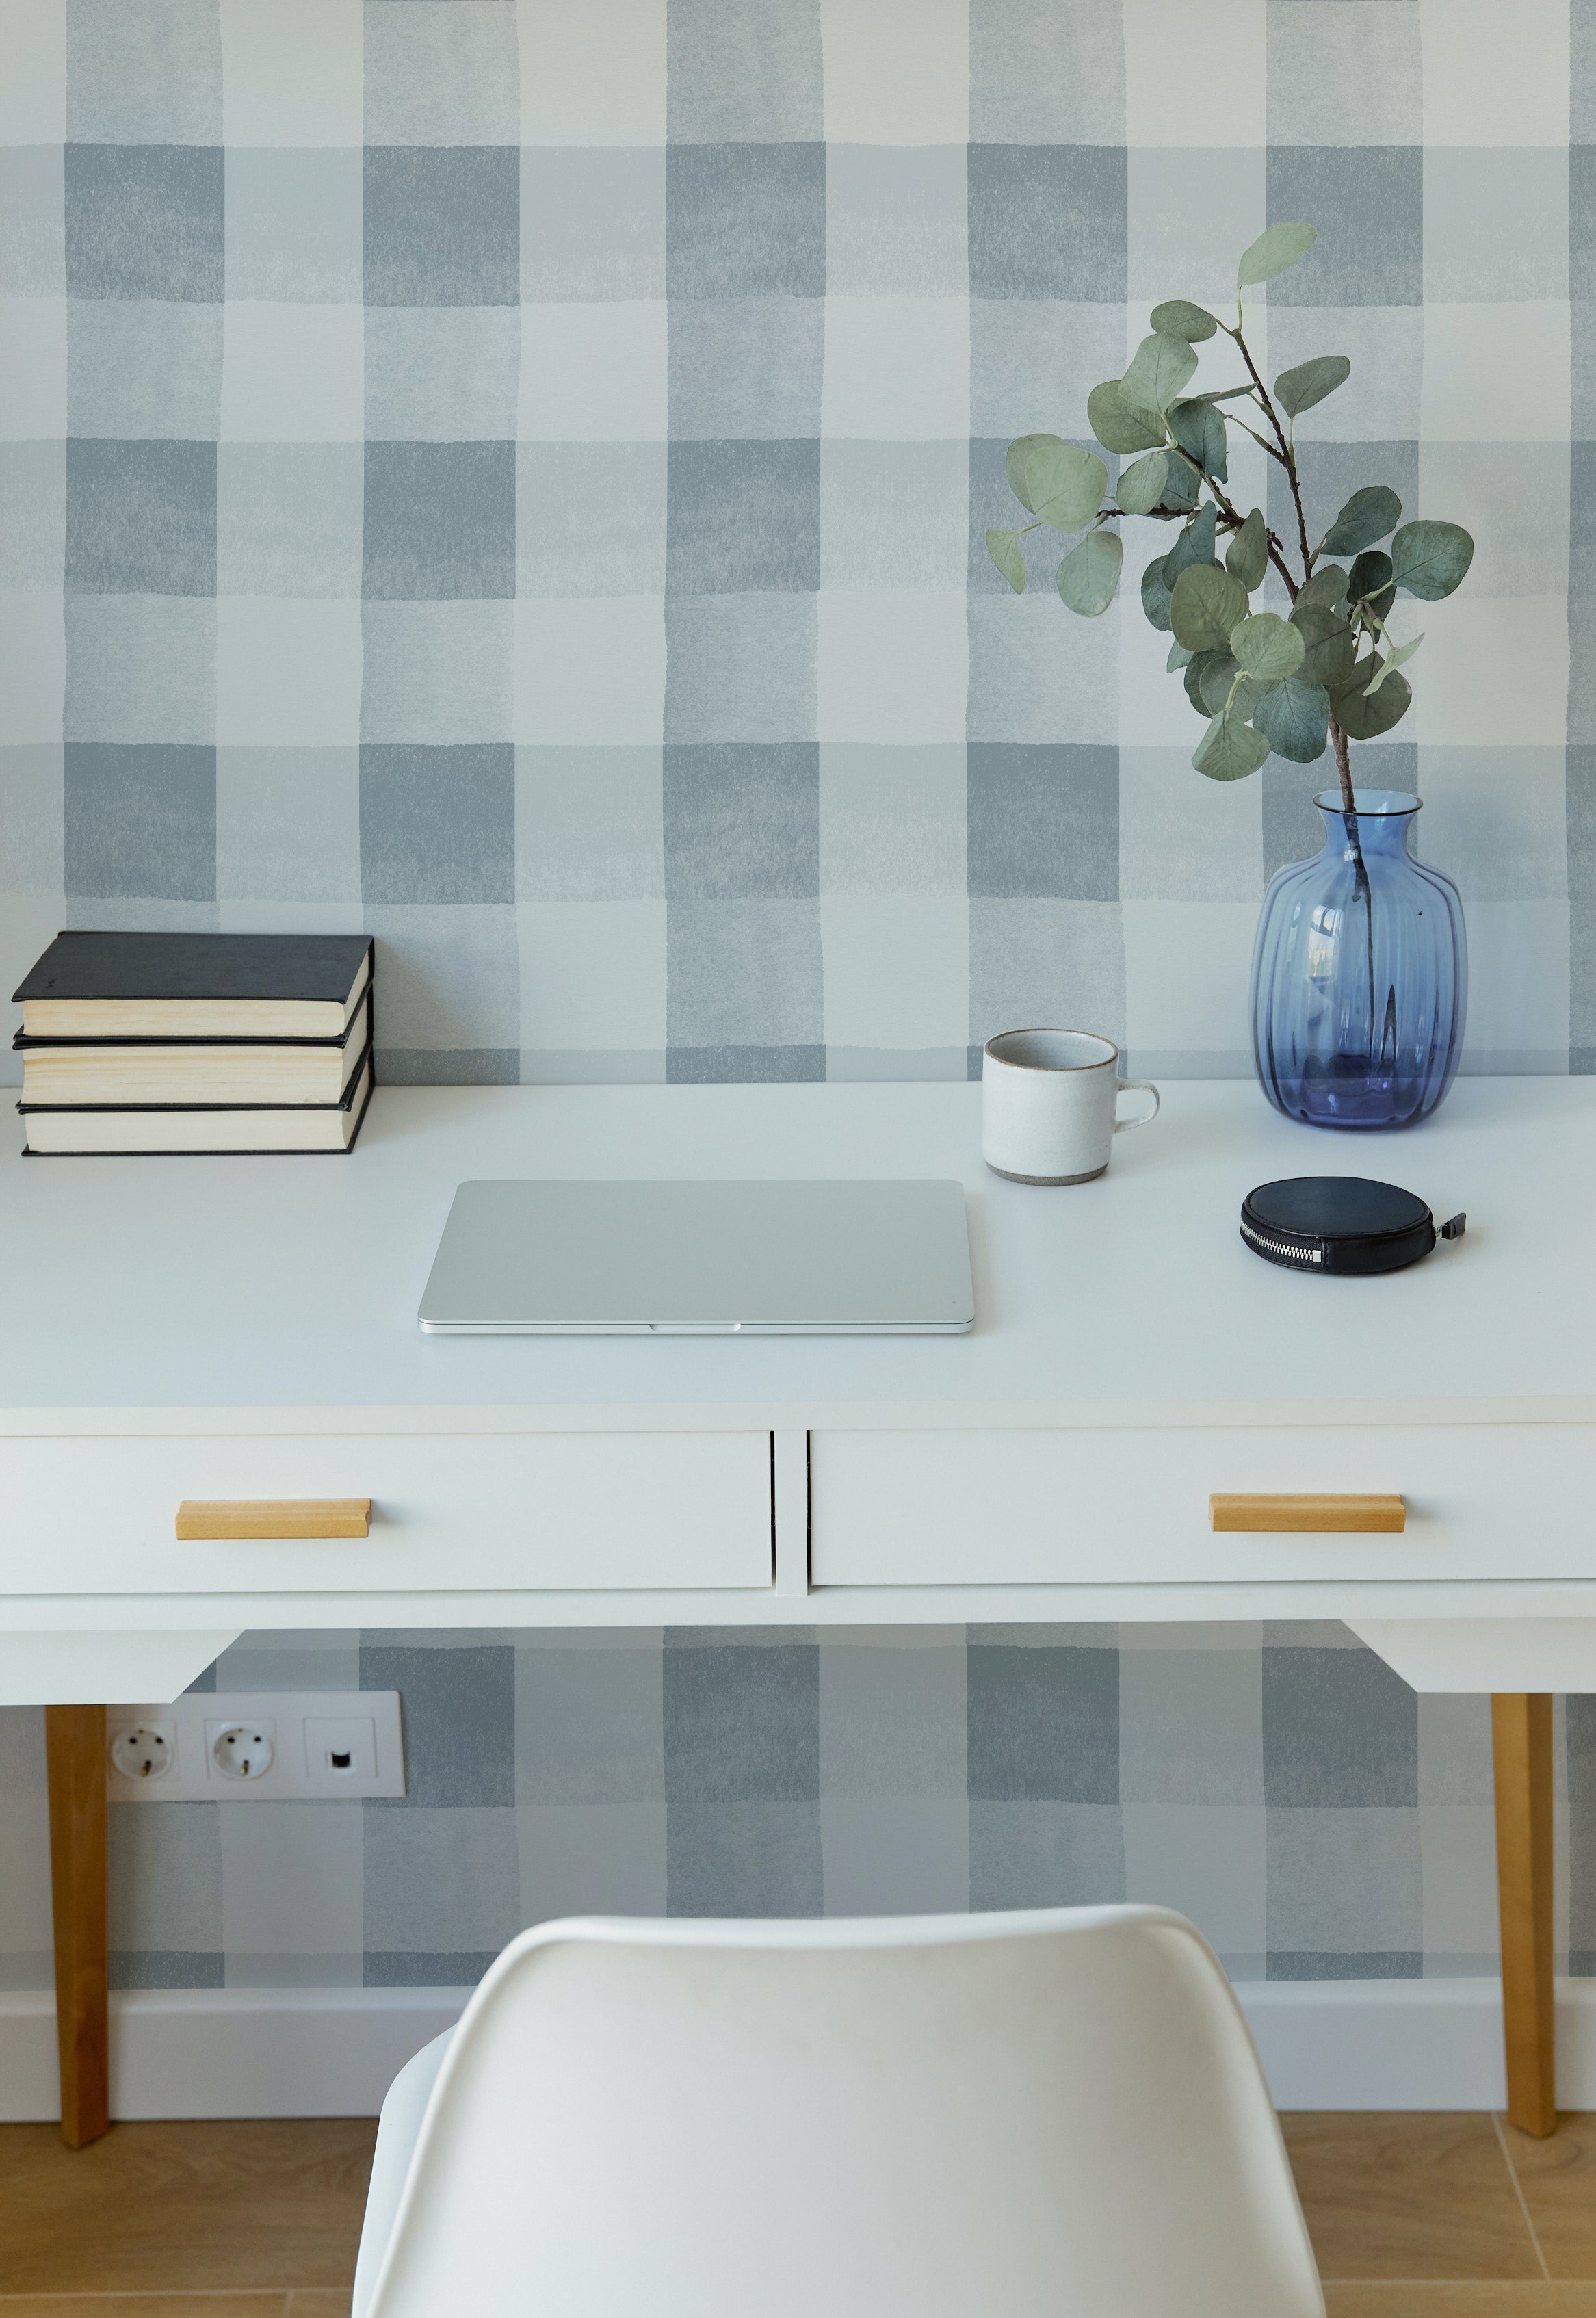 a modern home office setting with "Camille Wallpaper - Pale Blue" on the wall. The wallpaper displays a subtle, pale blue and white checkered pattern. The room features a sleek white desk with wooden handles, a laptop, a stack of books, a cup, and a stylish round storage box. A white chair is placed in front of the desk, and a vibrant blue vase with eucalyptus branches adds a touch of color to the serene palette.